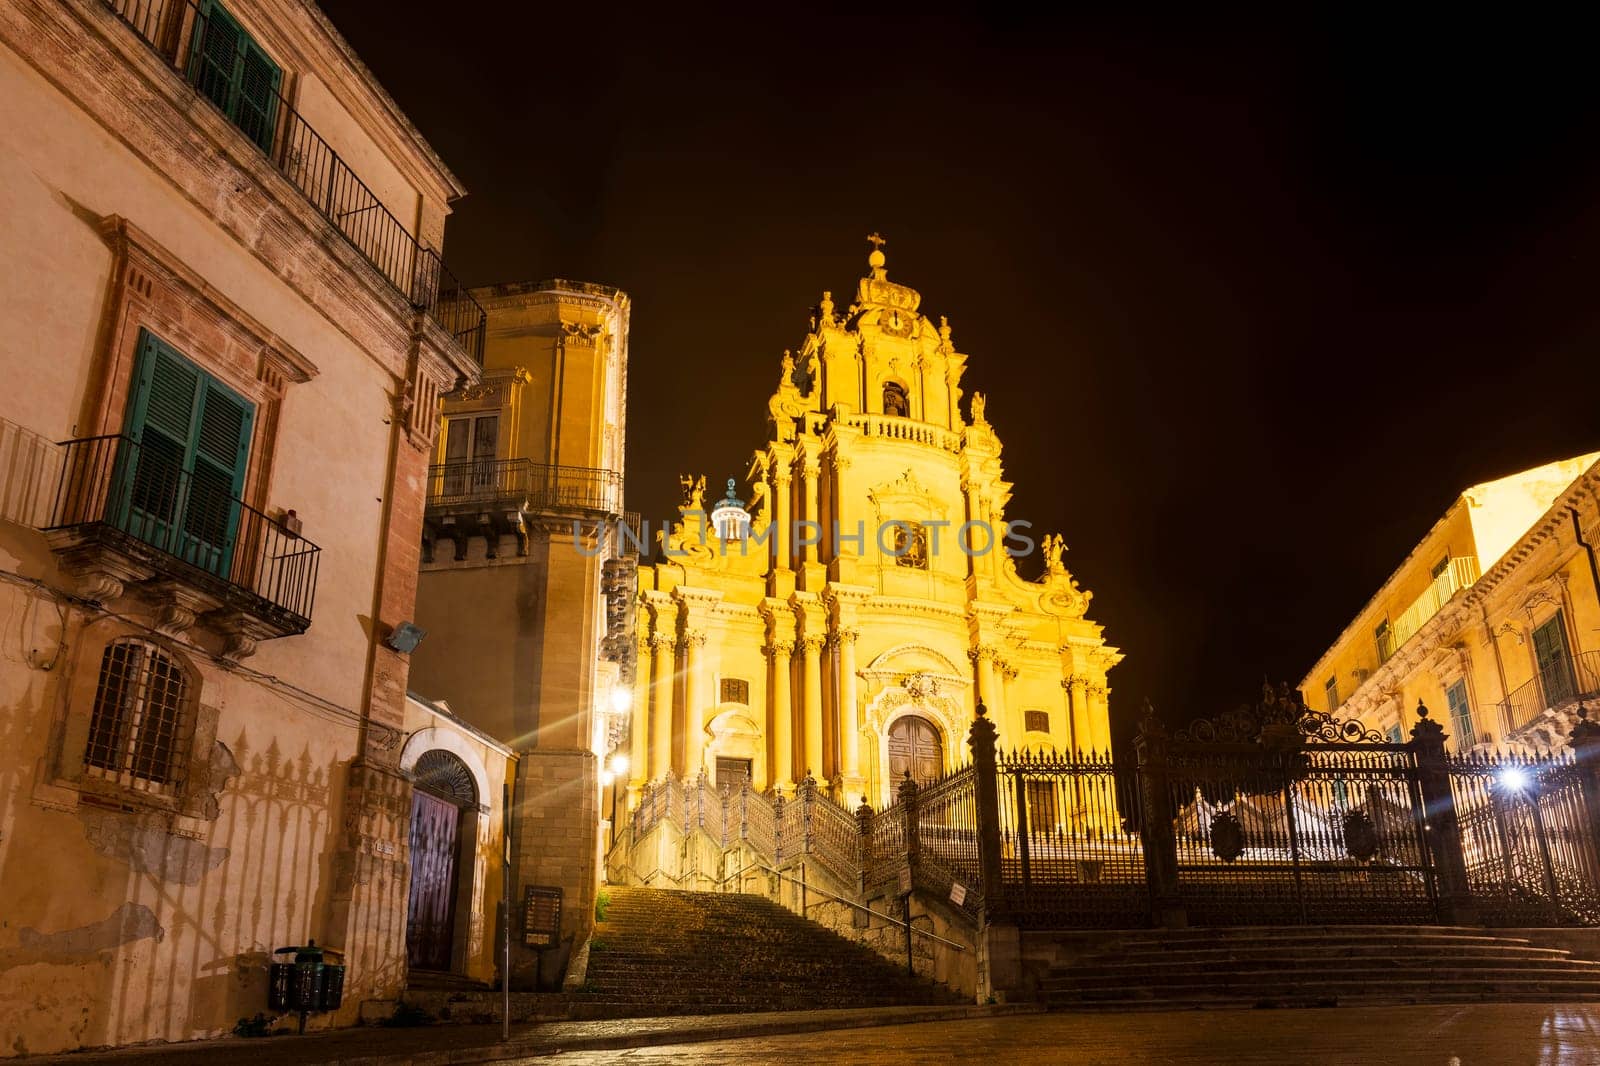 Night view of the piazza duomo and cathedral of San Giorgio in Ragusa ibla, Sicily by EdVal